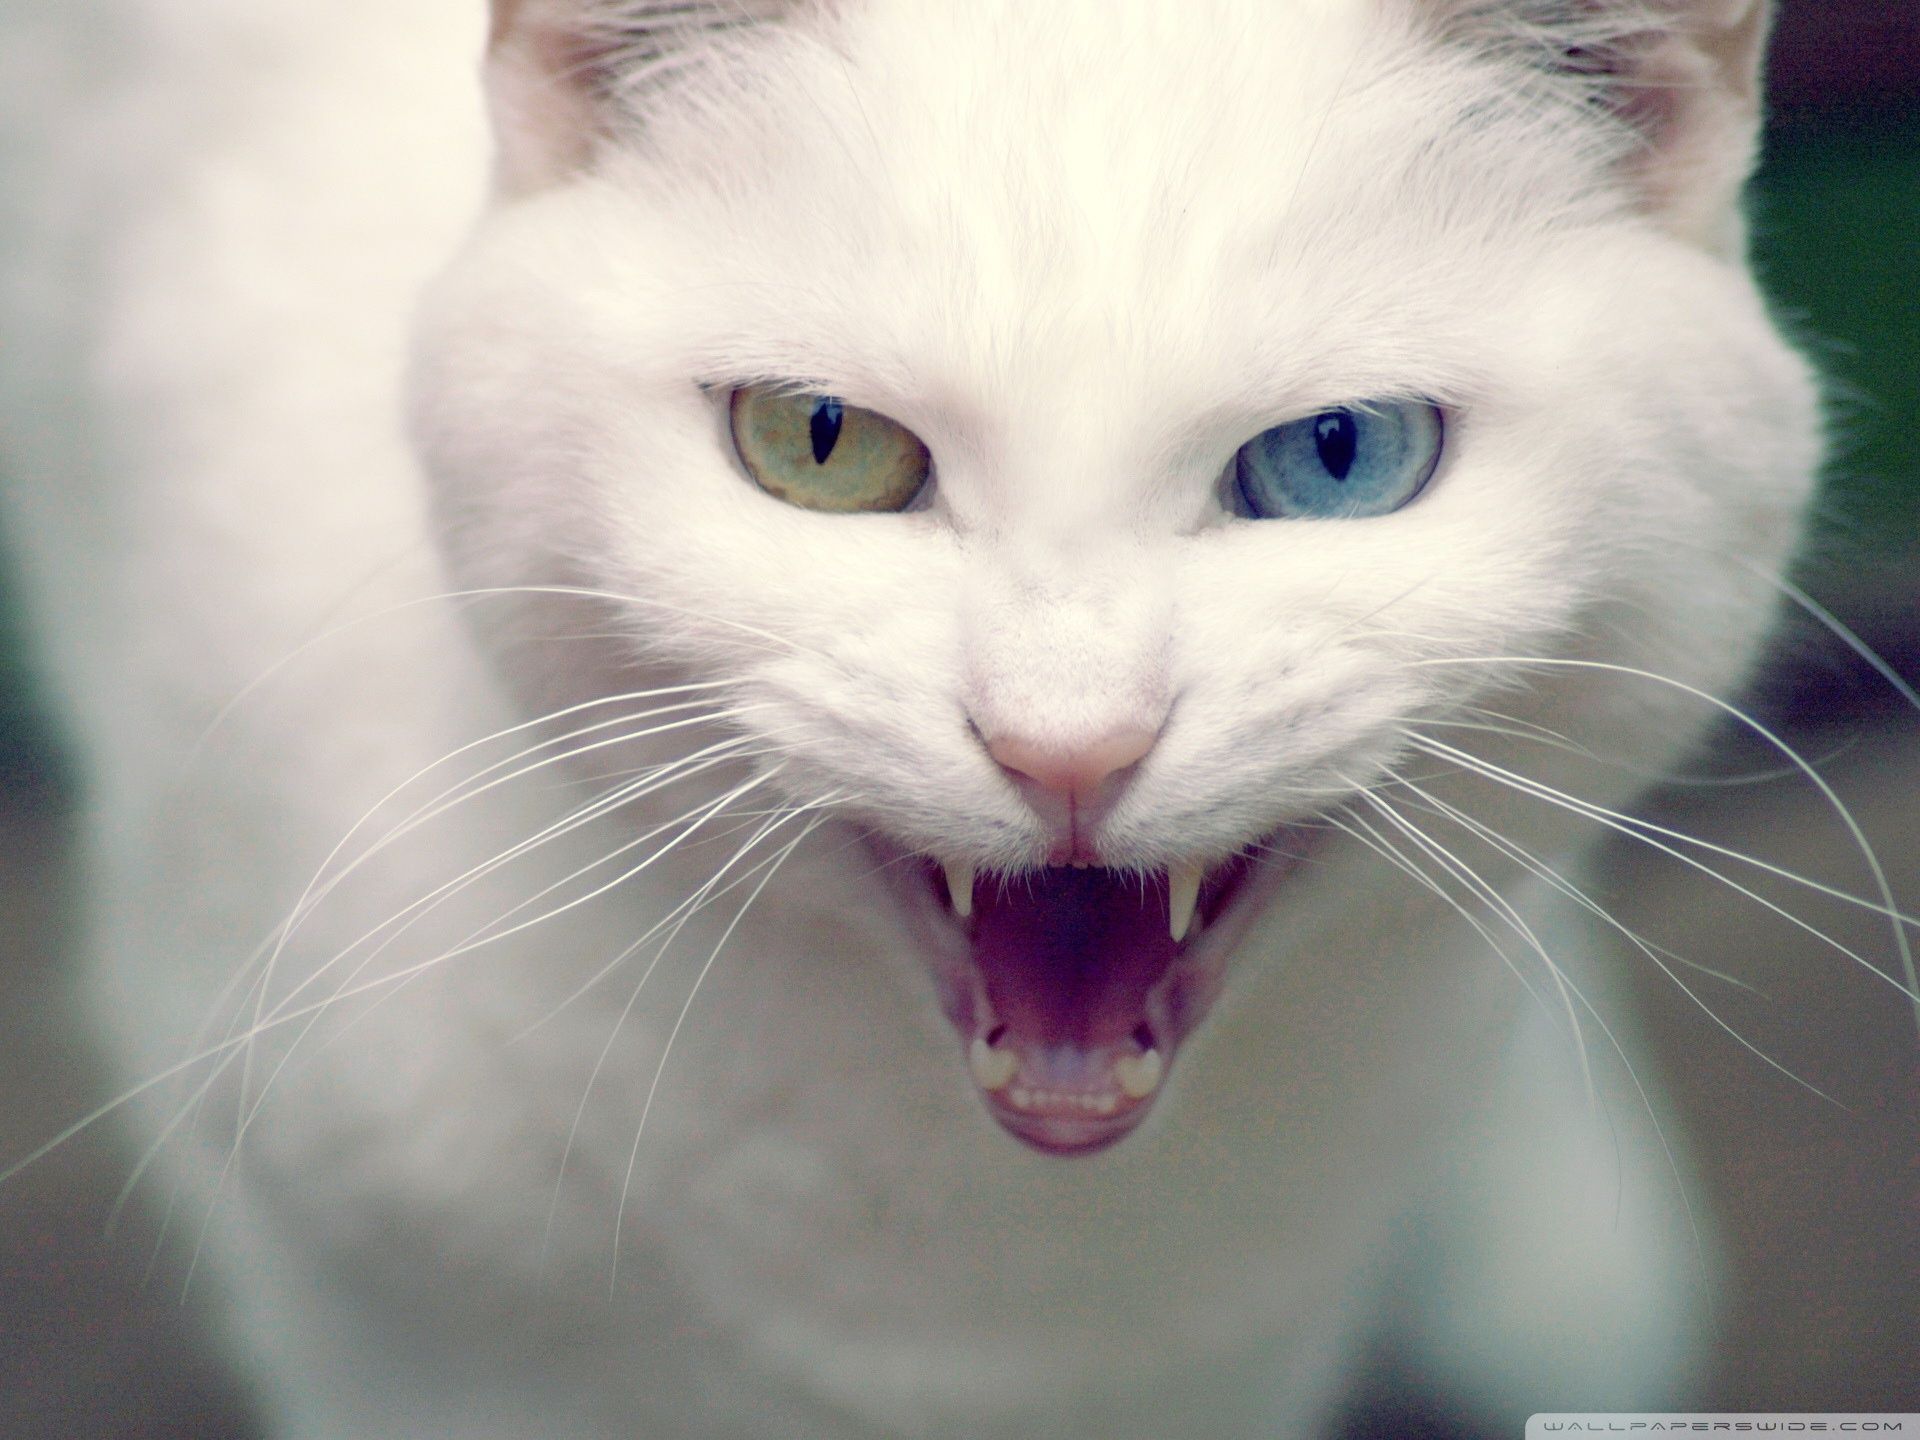 Angry Cat Ultra HD Desktop Background Wallpaper for 4K UHD TV